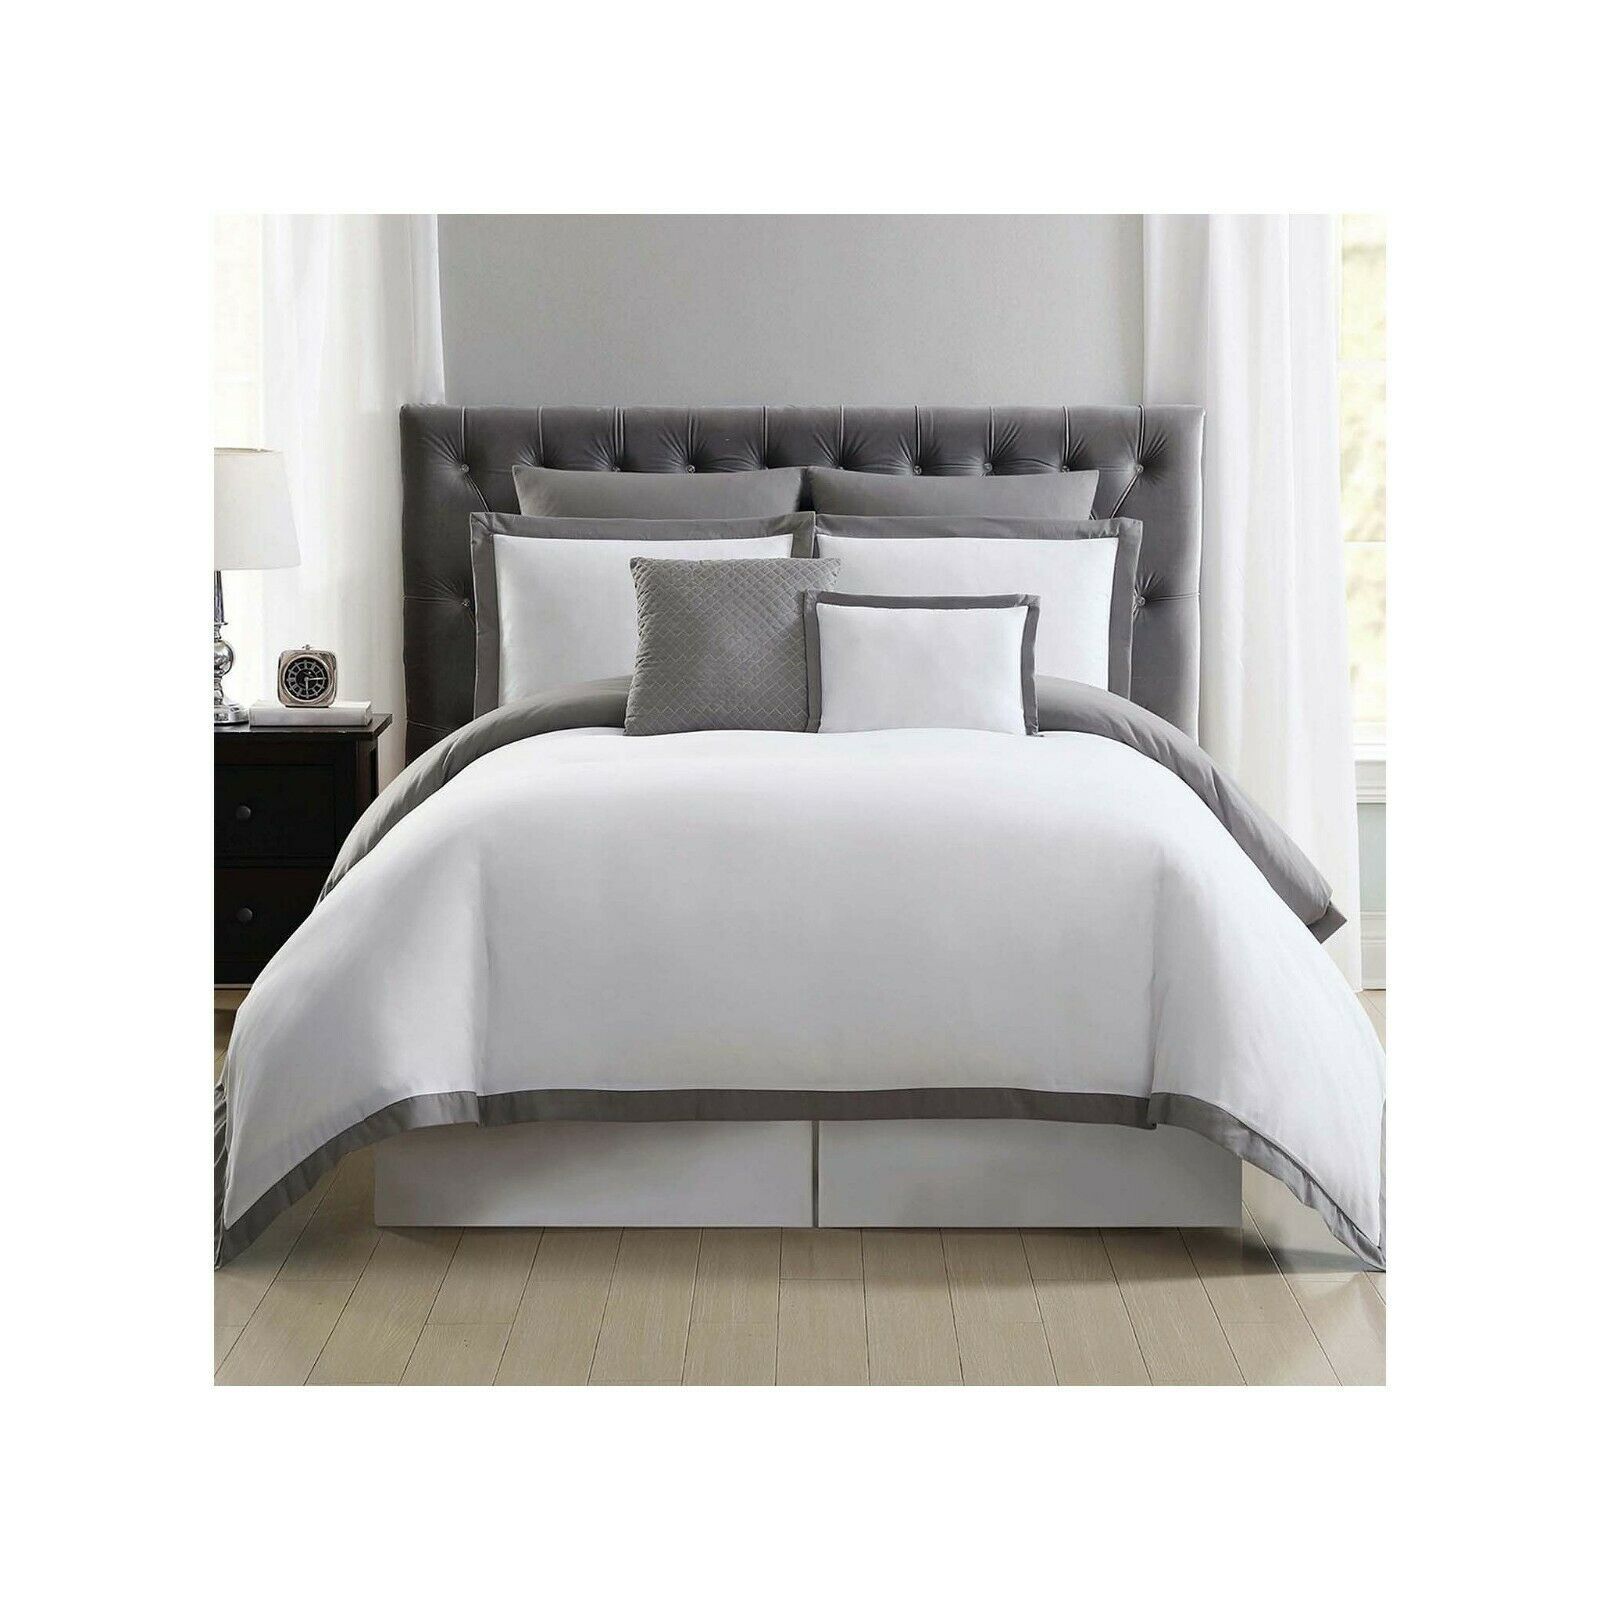 Truly Soft Everyday Full/Queen Hotel Border 7-pc  Duvet Cover Set White/Gray - $79.19